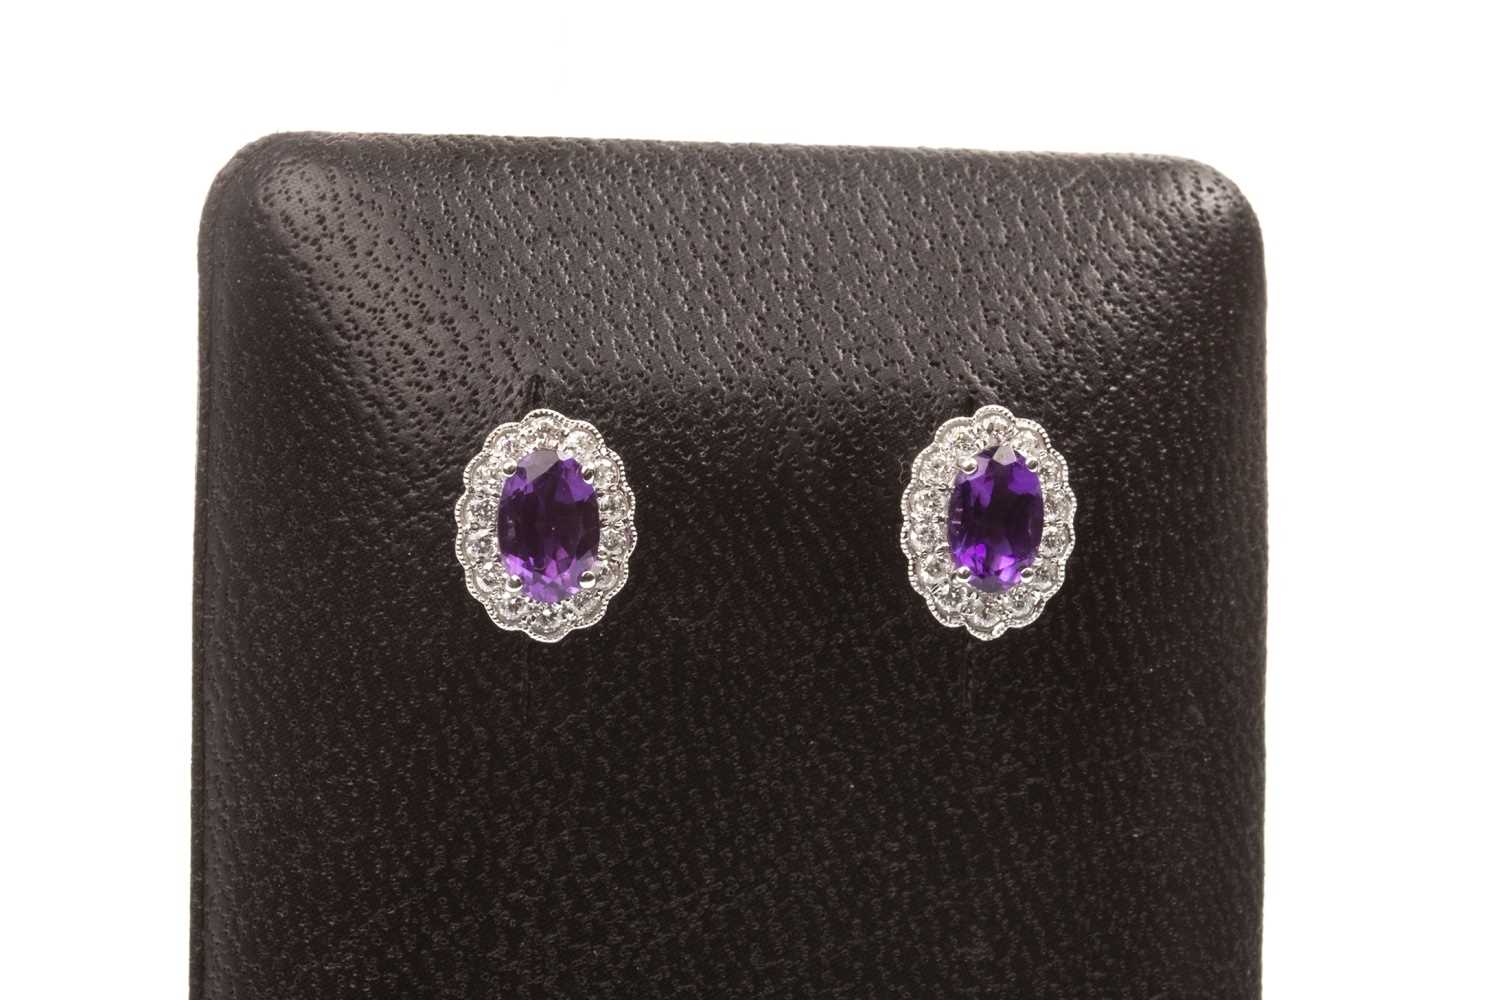 Lot 70 - A PAIR OF AMETHYST AND DIAMOND EARRINGS